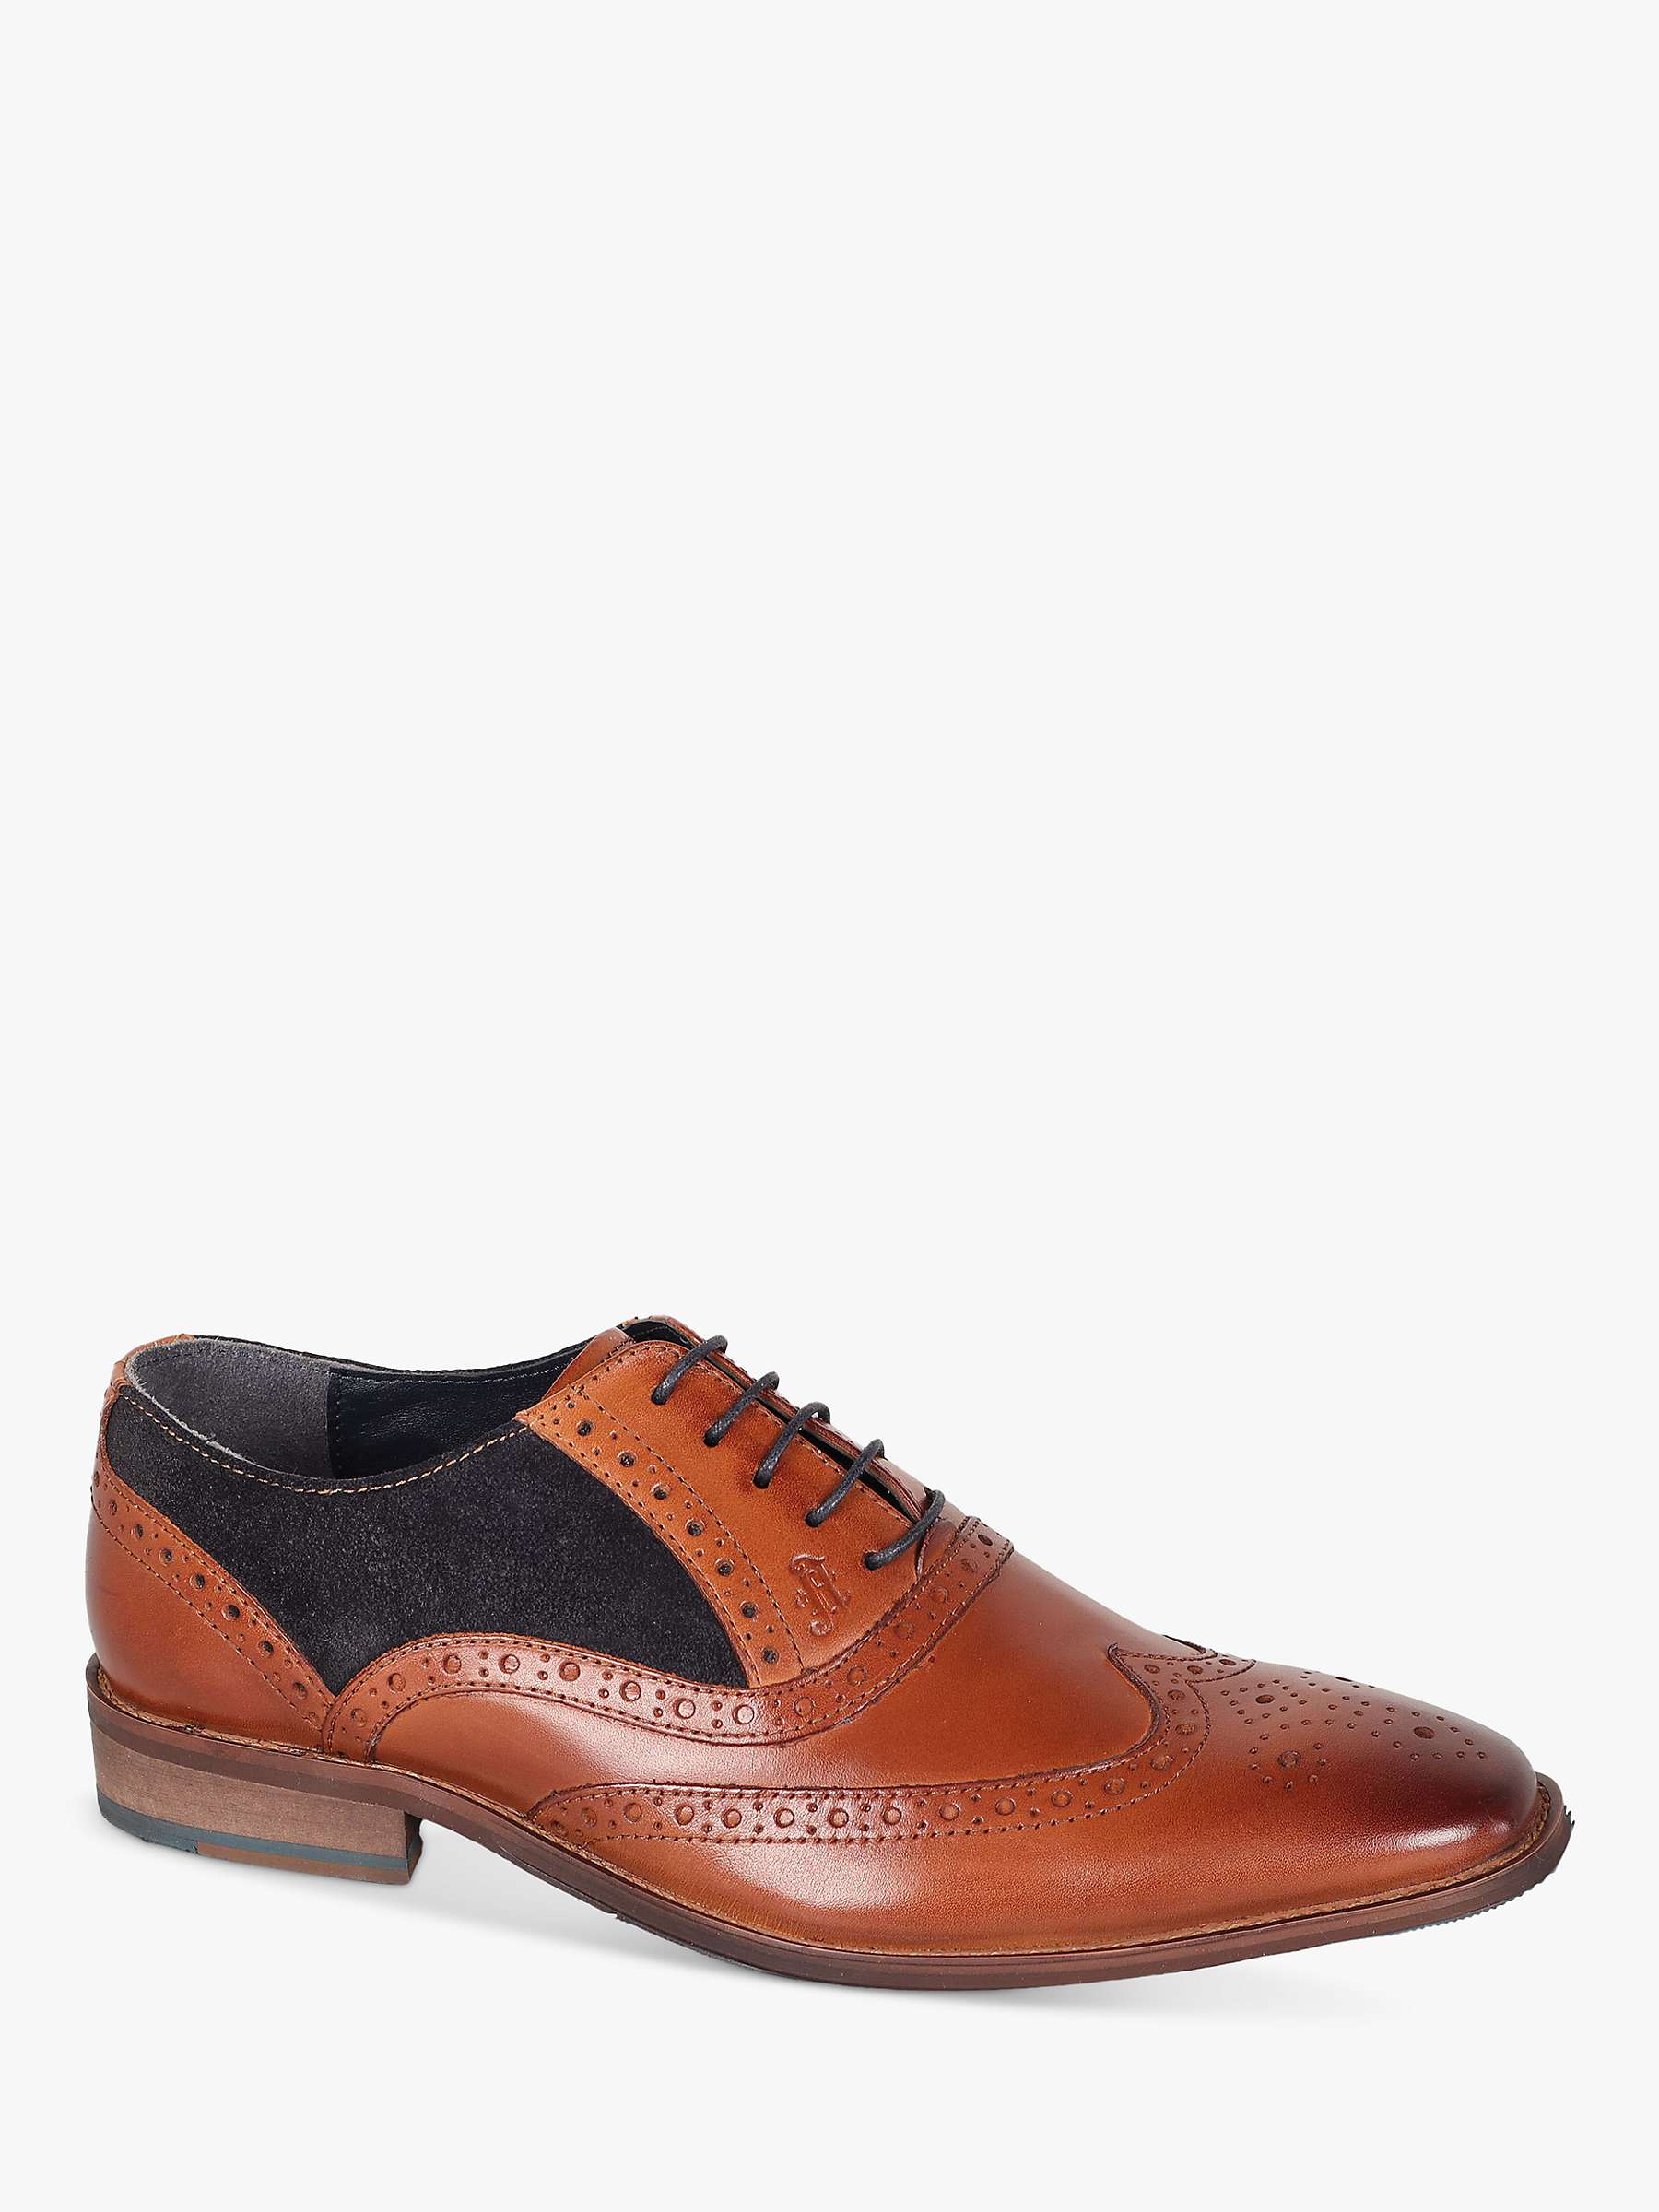 Buy Silver Street London Amen Collection Silgo Leather Brogues, Tan/Black Online at johnlewis.com